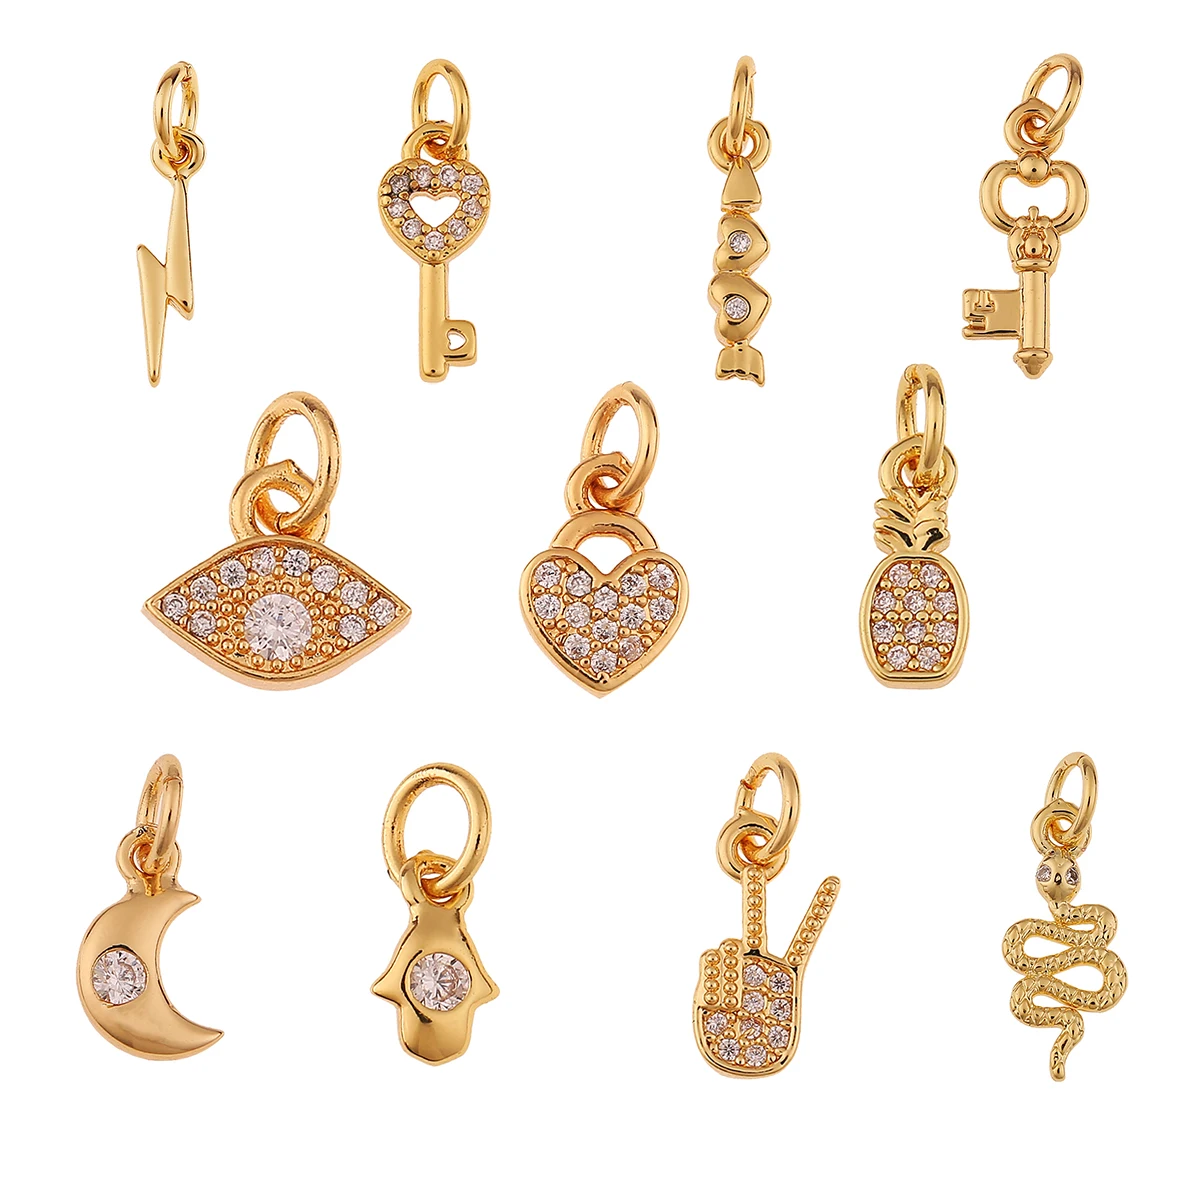 

AAA CZ Brass Gold-plated Evil Eye Key Lock Moon Charm Pendant Finding DIY Snake Necklace Hand Earring Making Wholesale Jewelry